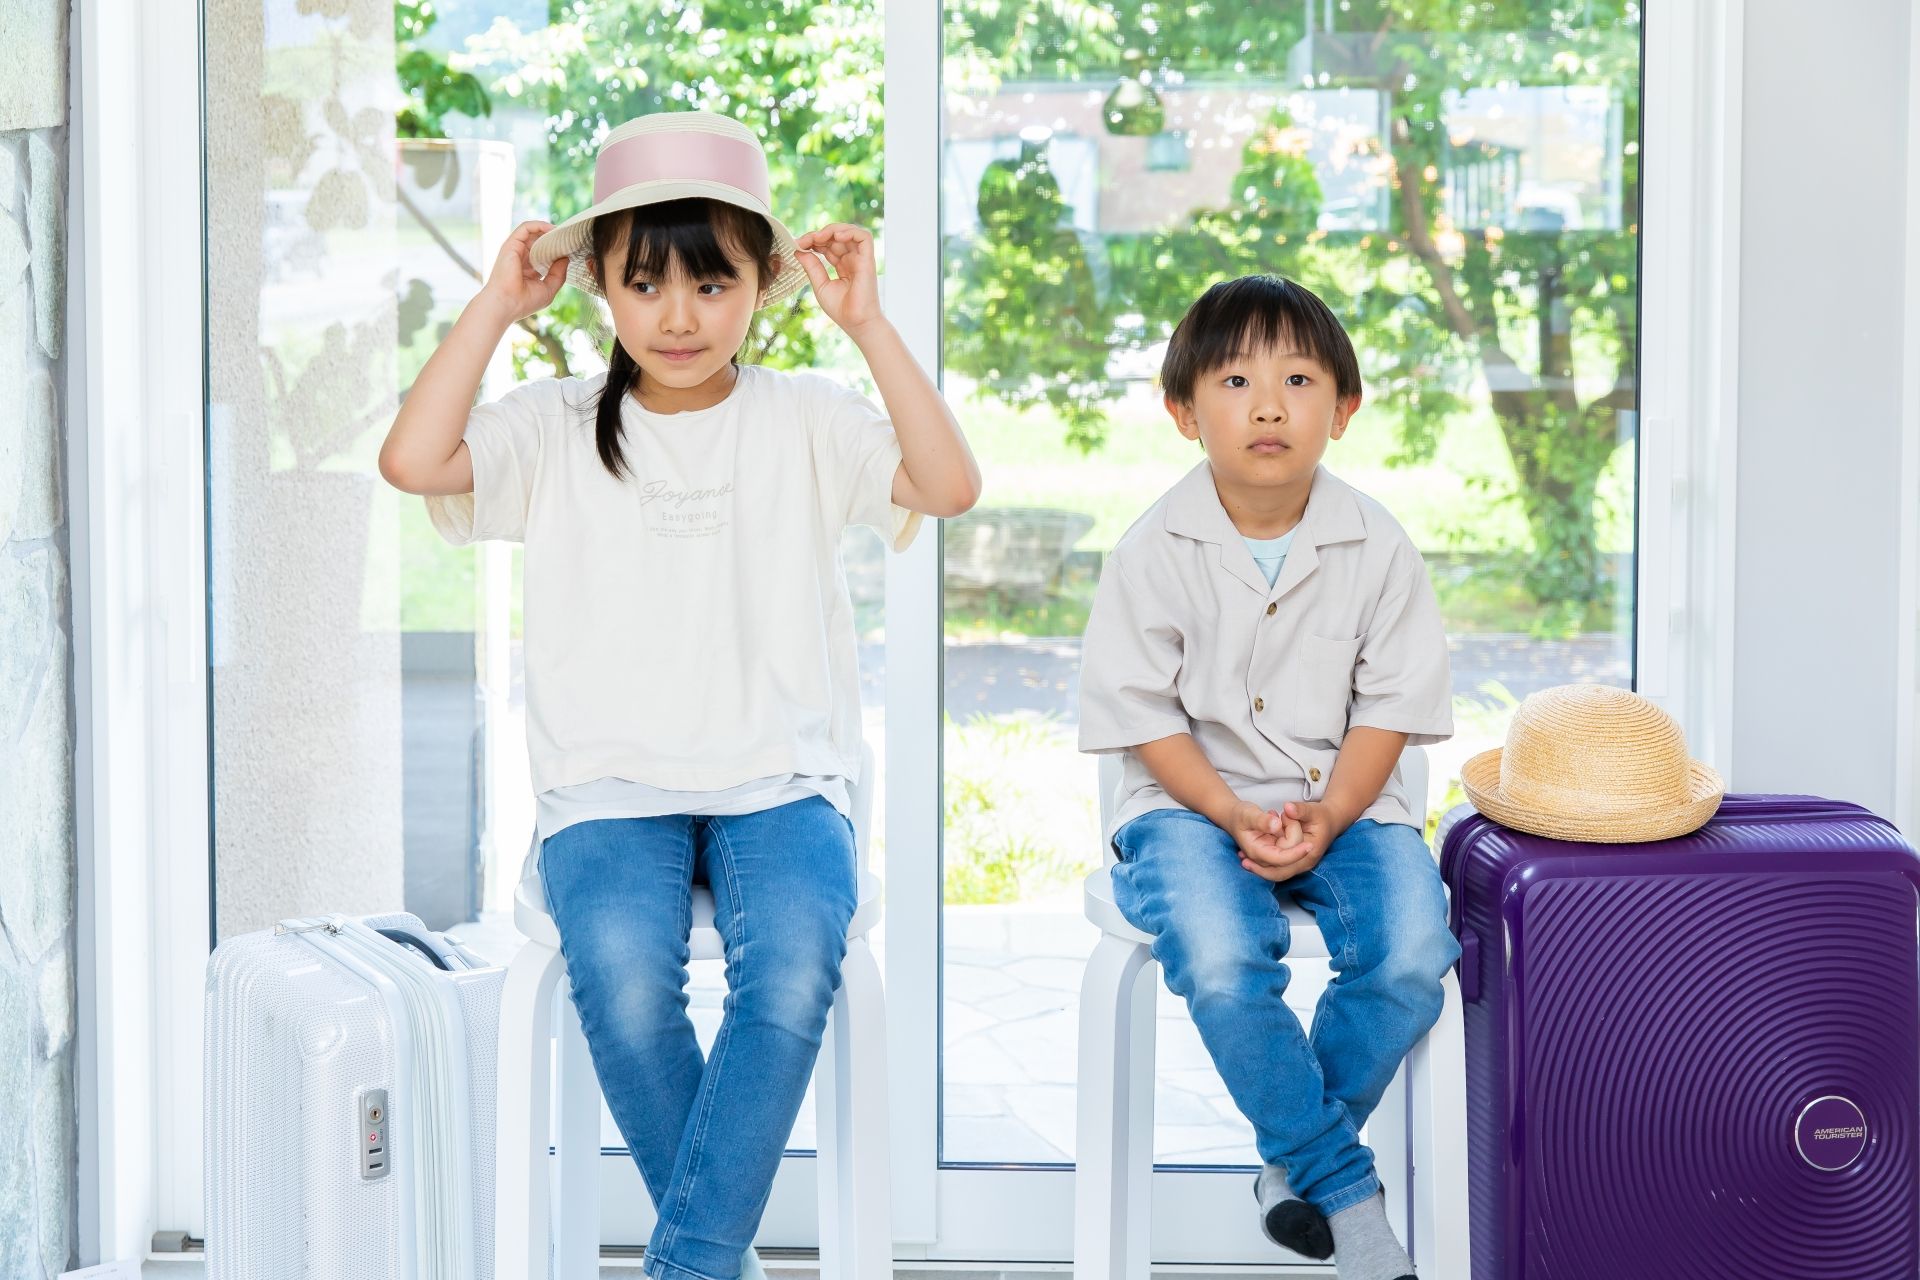 Photo of a travel suitcase next to two children